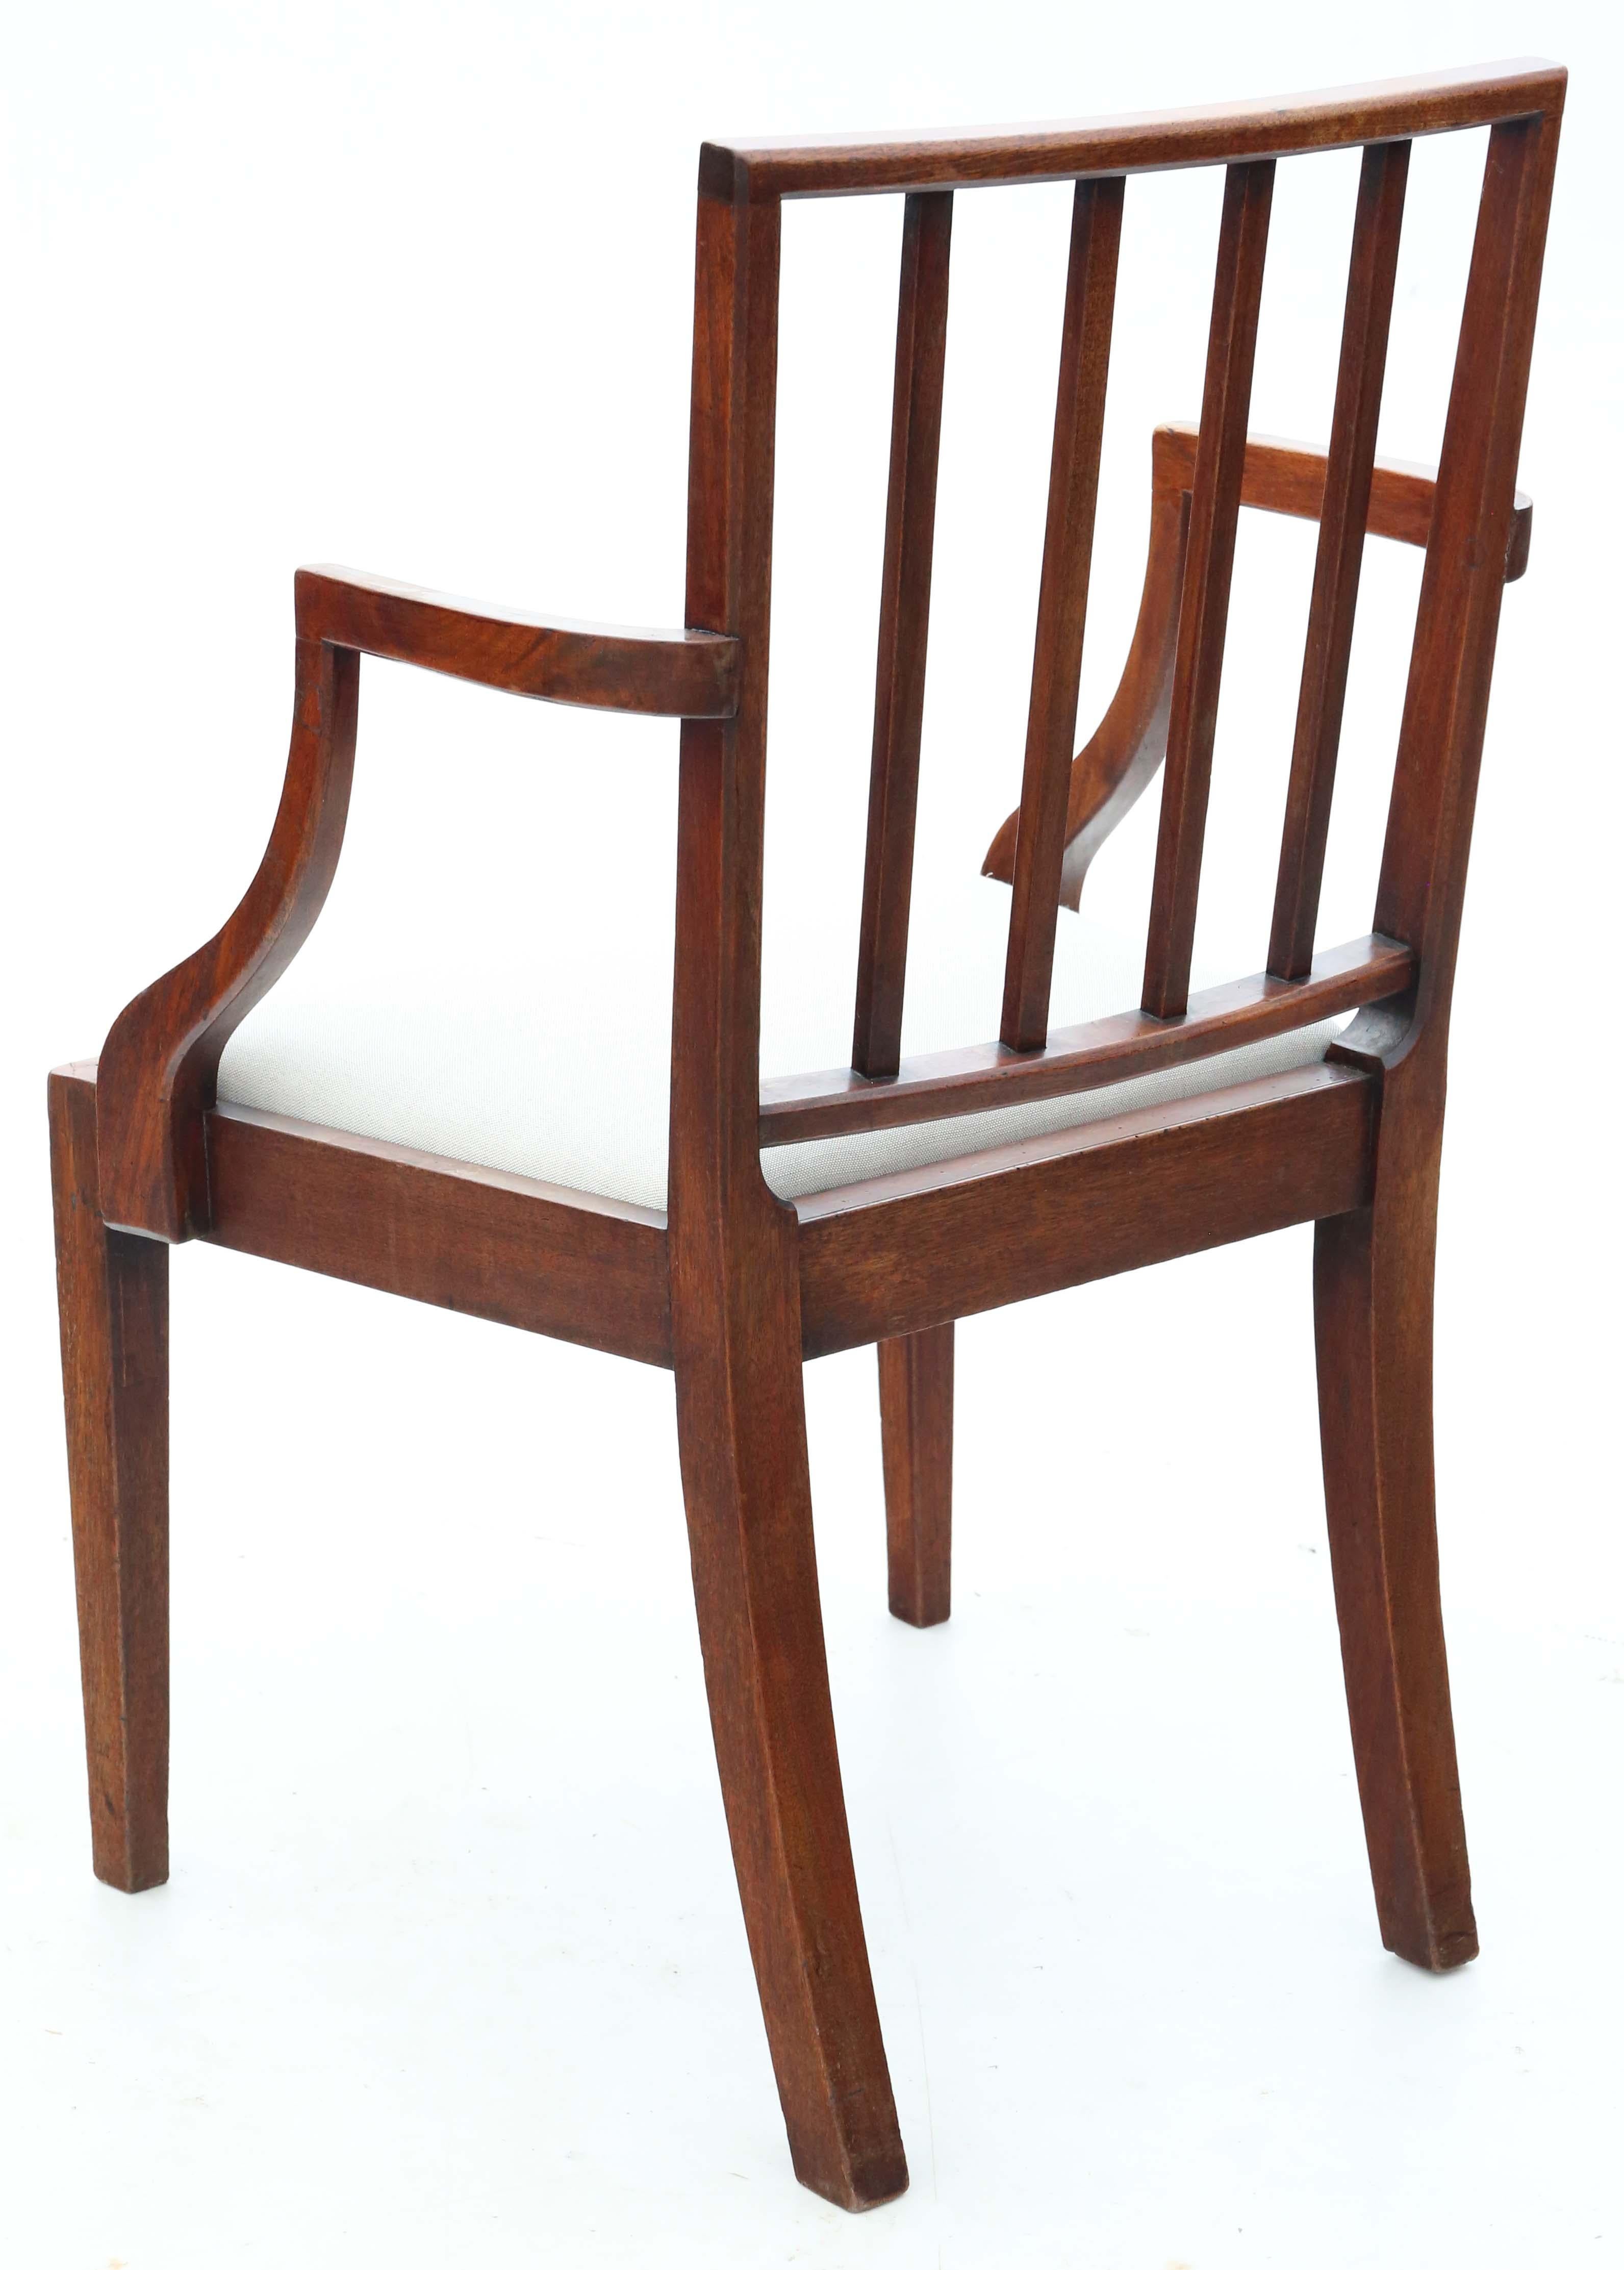 Mahogany Dining Chairs: Set of 8 (6+2), Antique Quality, C1820 For Sale 3